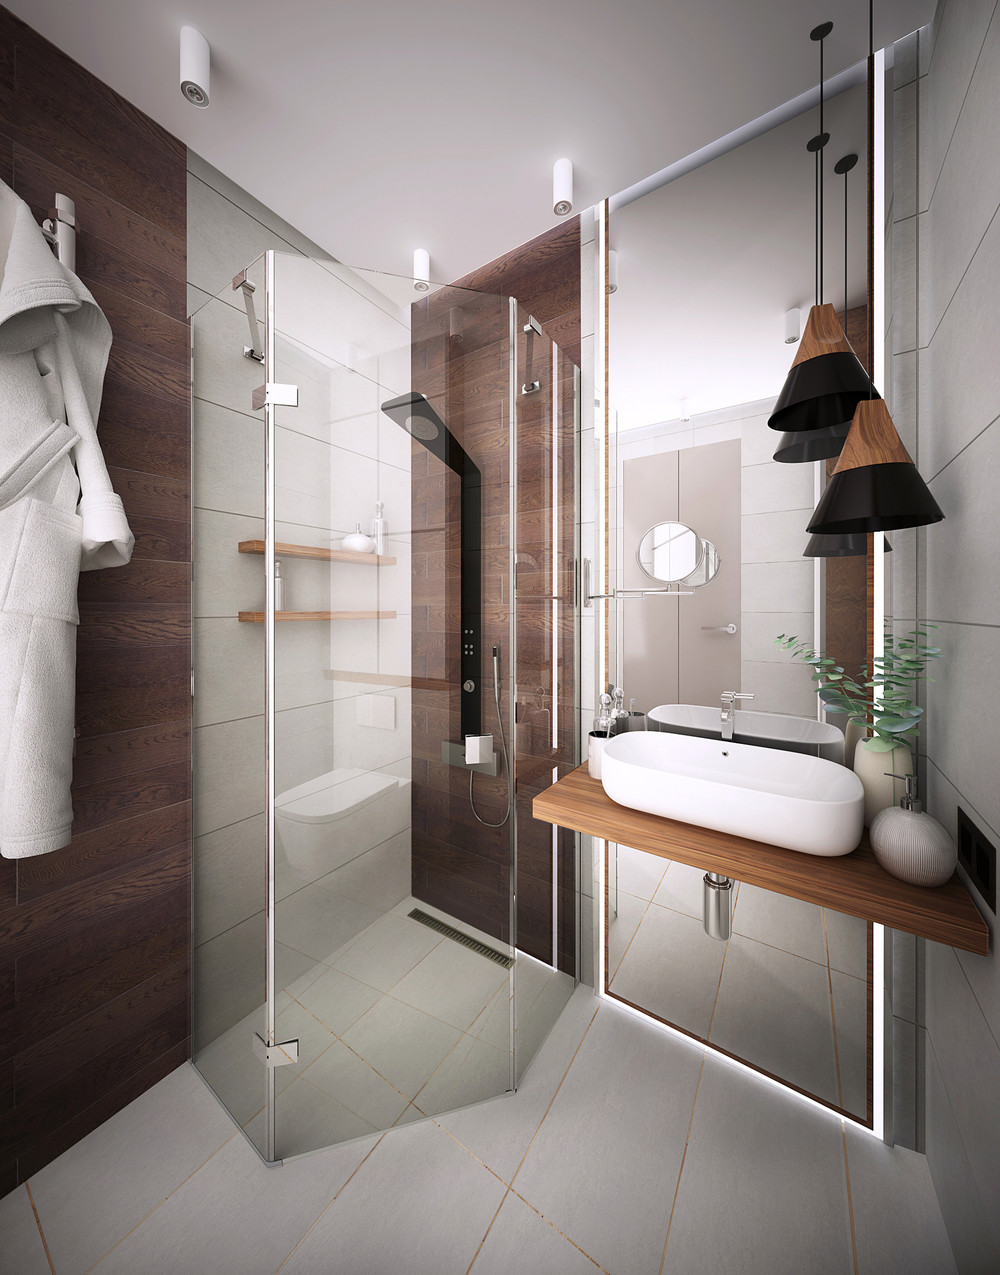 simple bathroom decoration idea "width =" 1000 "height =" 1275 "srcset =" https://mileray.com/wp-content/uploads/2020/05/1588516146_901_Inspiration-For-Bathroom-Decorating-Ideas-With-an-Attractive-Design-Showing.jpg 1000w, https://mileray.com/wp -content / uploads / 2016/09 / DesignRush1-235x300.jpg 235w, https://mileray.com/wp-content/uploads/2016/09/DesignRush1-768x979.jpg 768w, https://mileray.com/wp -content / uploads / 2016/09 / DesignRush1-803x1024.jpg 803w, https://mileray.com/wp-content/uploads/2016/09/DesignRush1-696x887.jpg 696w, https://mileray.com/wp -content / uploads / 2016/09 / DesignRush1-329x420.jpg 329w "sizes =" (maximum width: 1000px) 100vw, 1000px